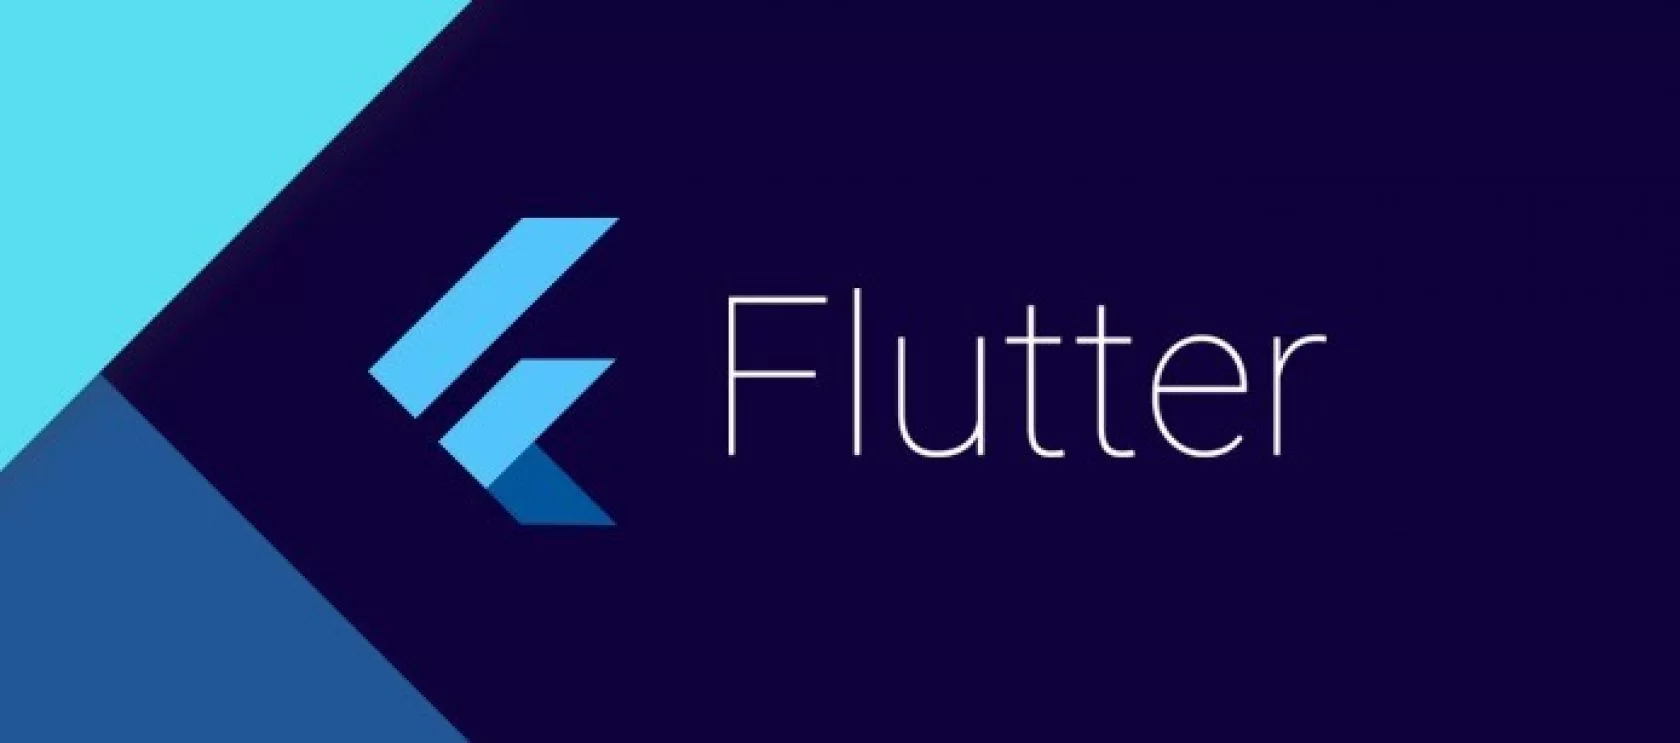 what exactly is Flutter?